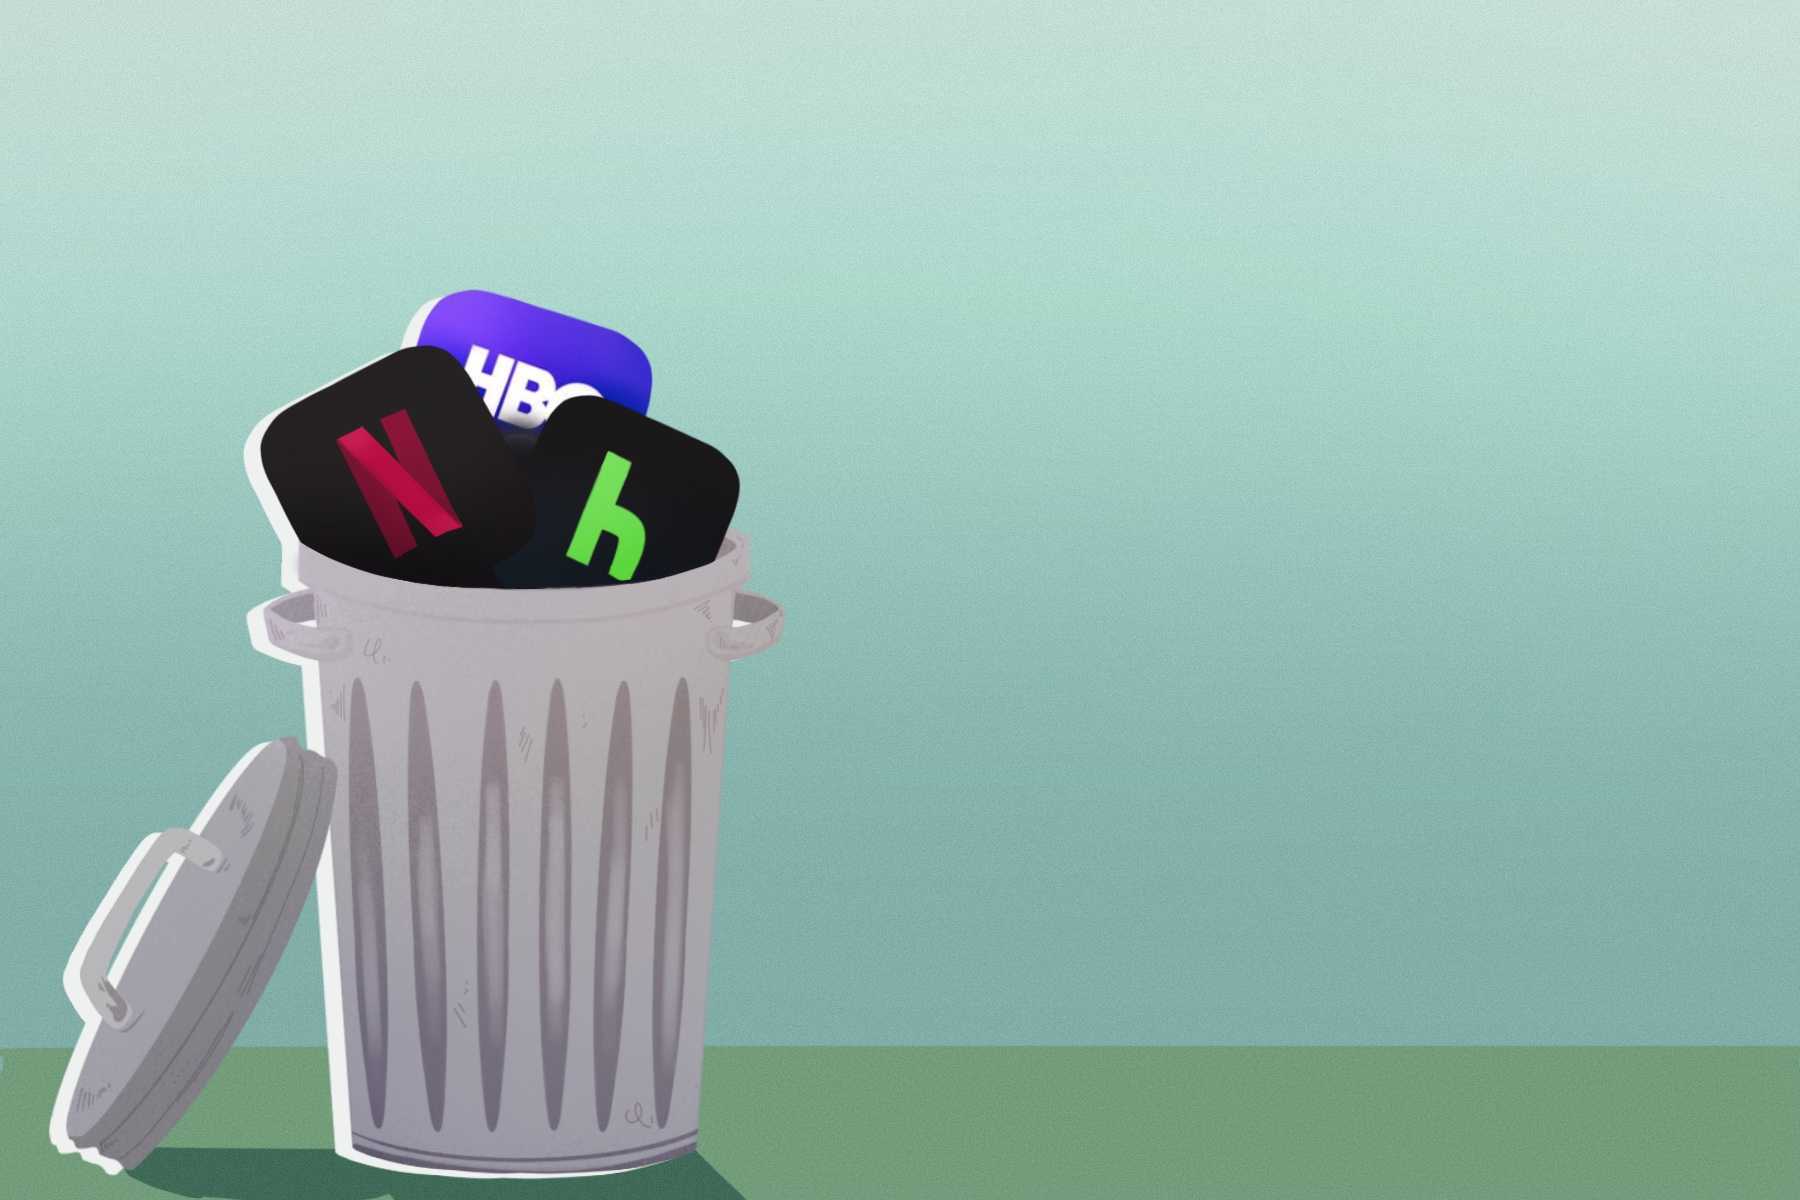 A drawing of streaming services shows their logos in the trash